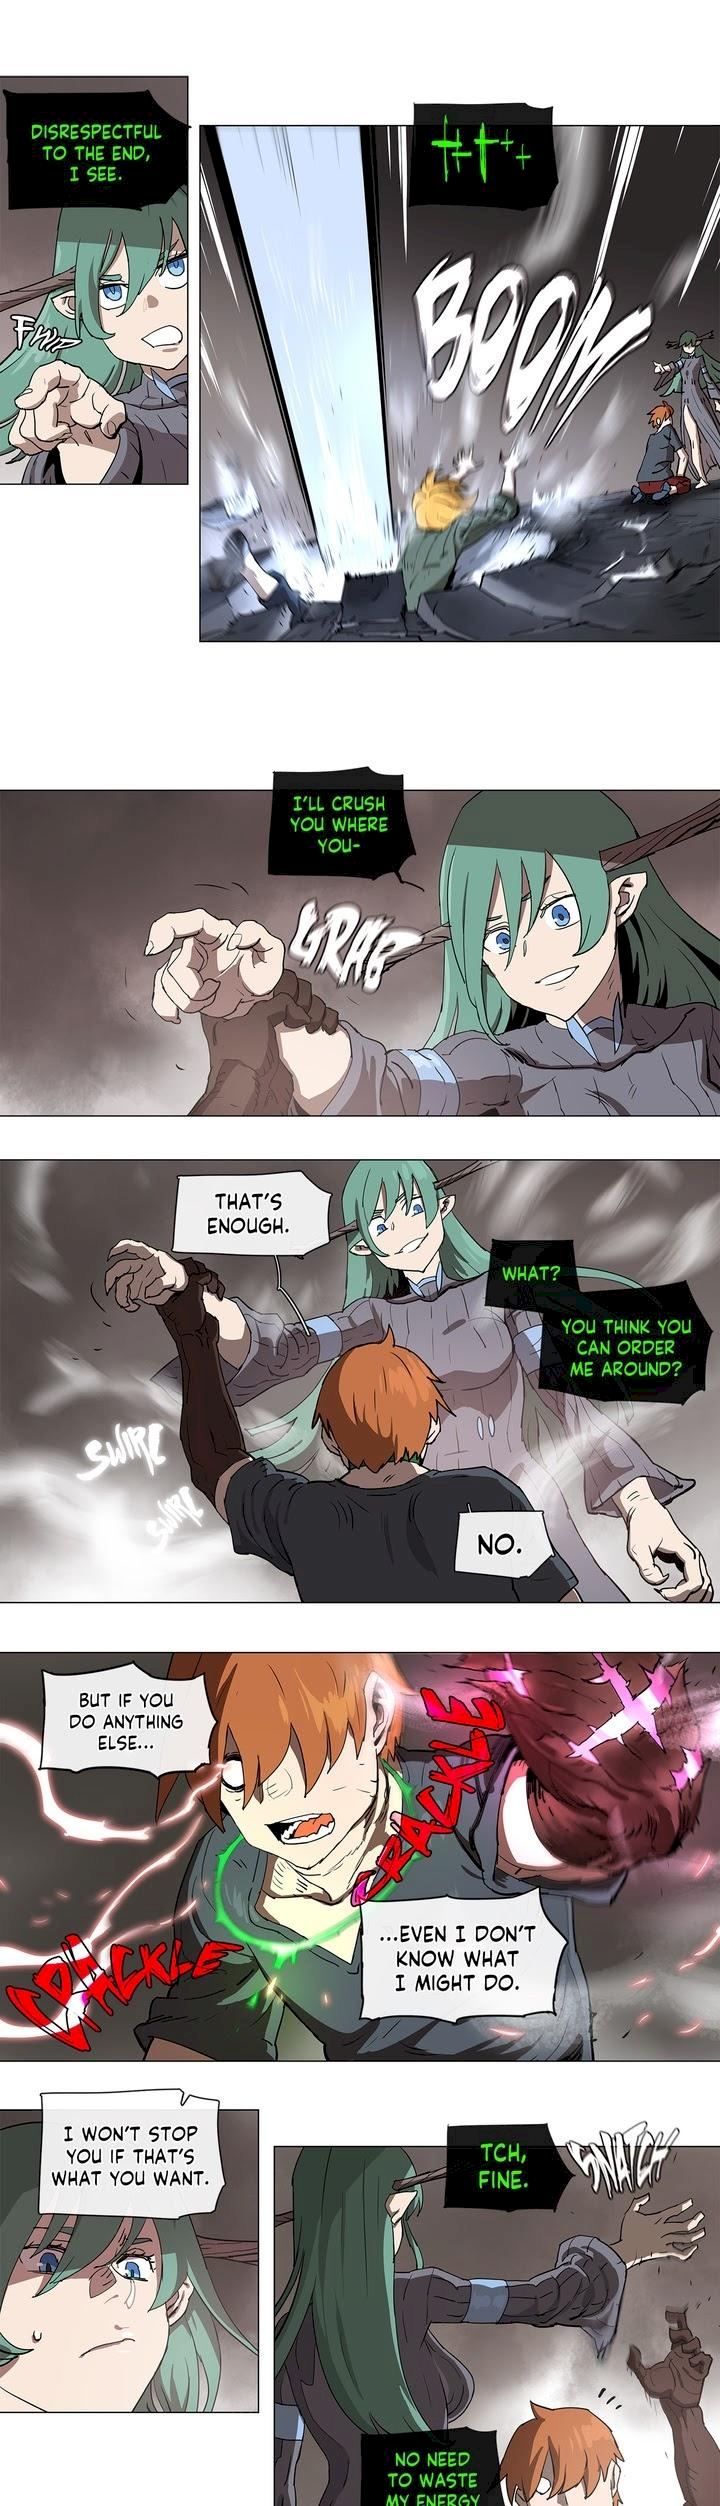 4 Cut Hero - Chapter 104 Page 3